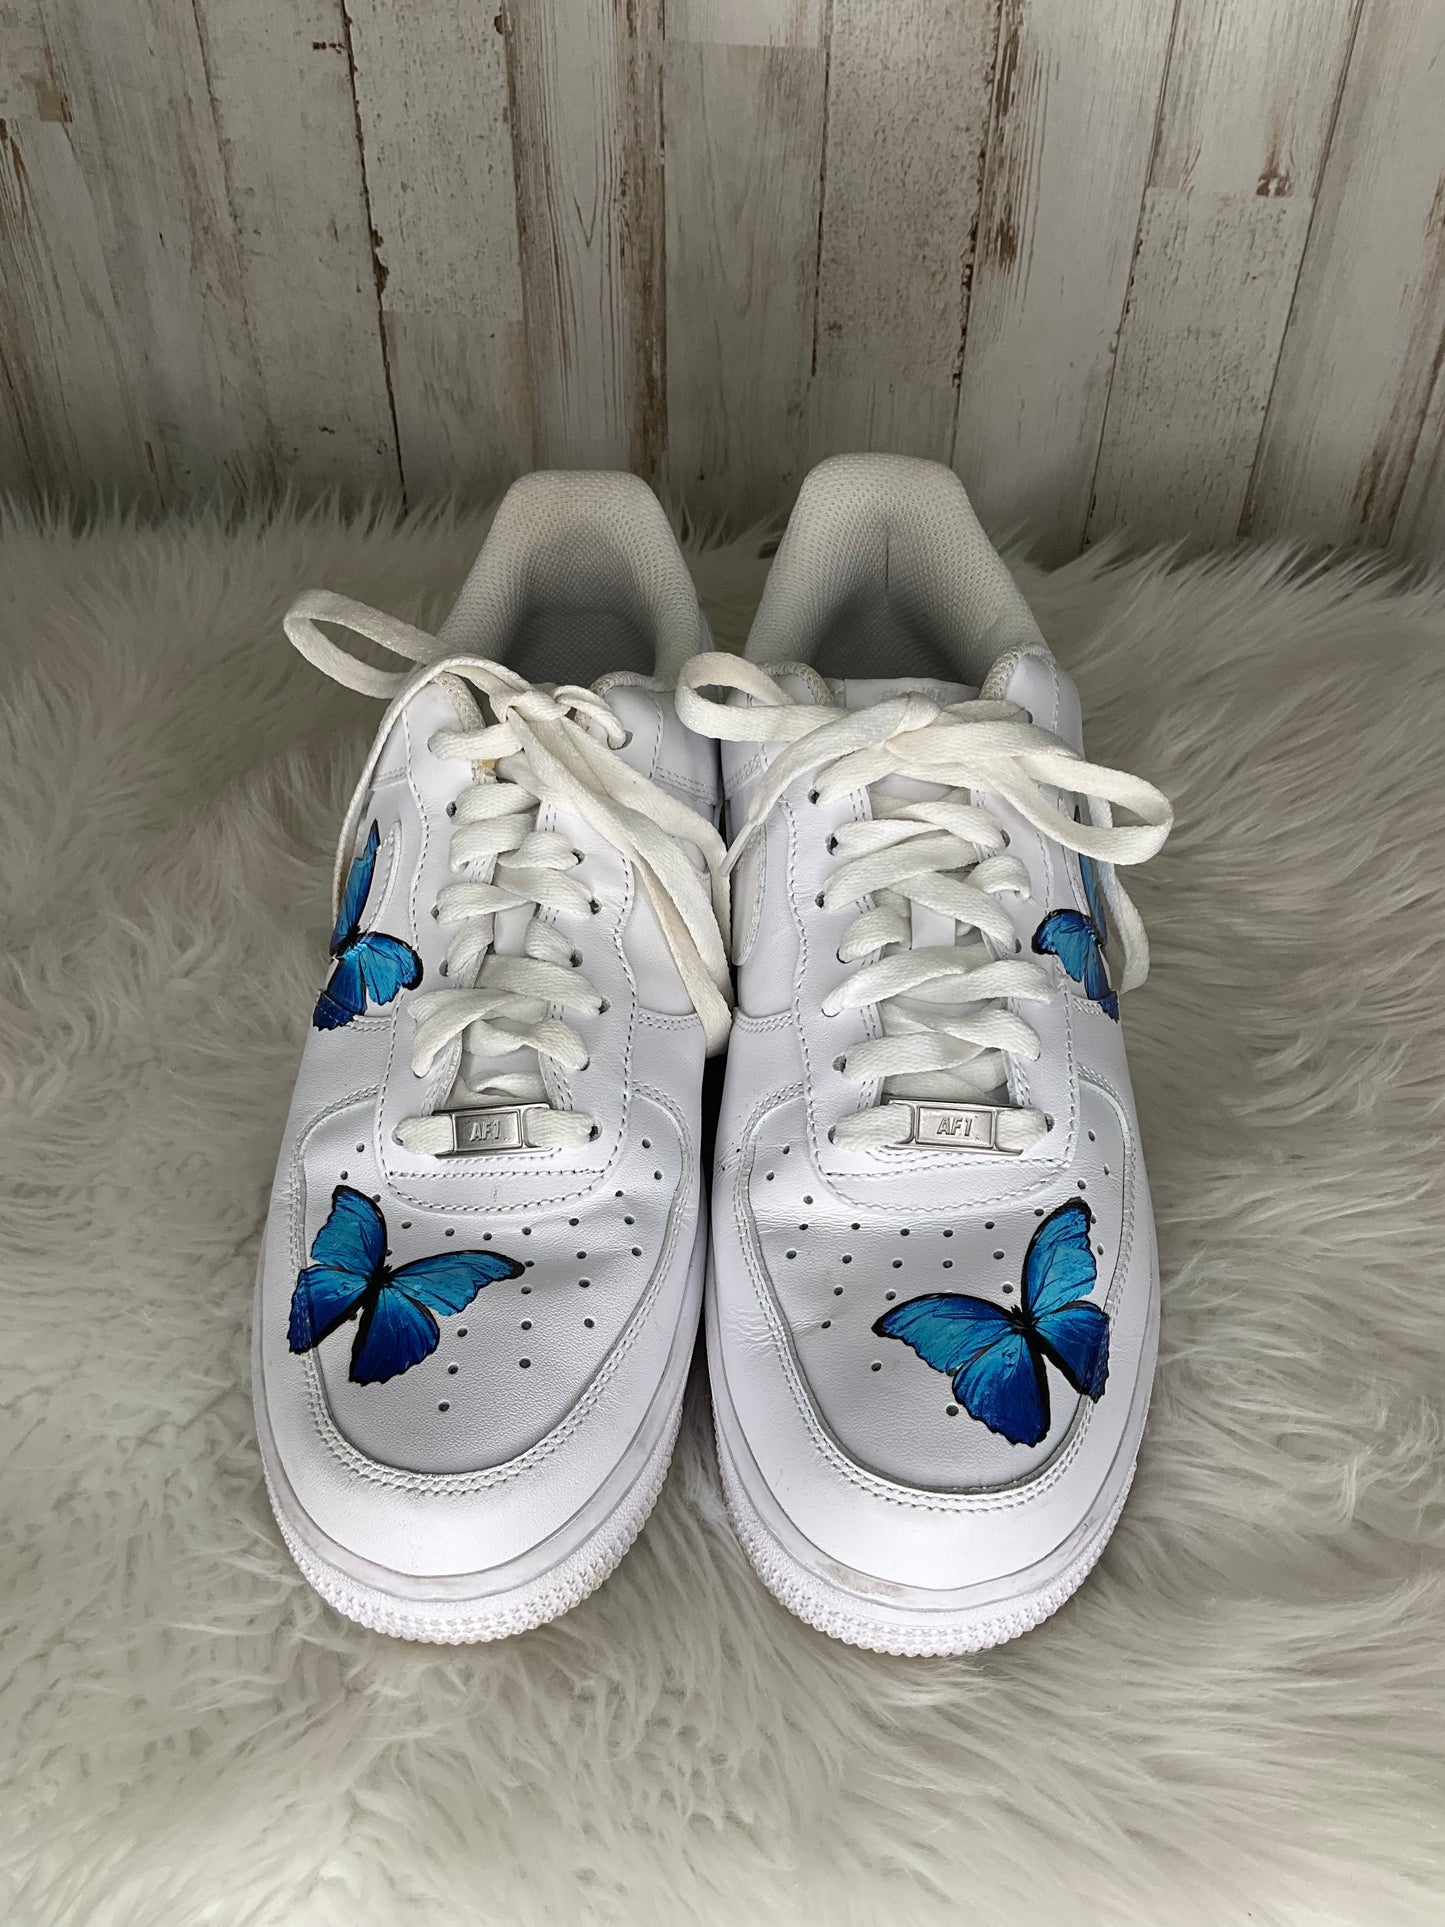 White Shoes Sneakers Nike, Size 7.5